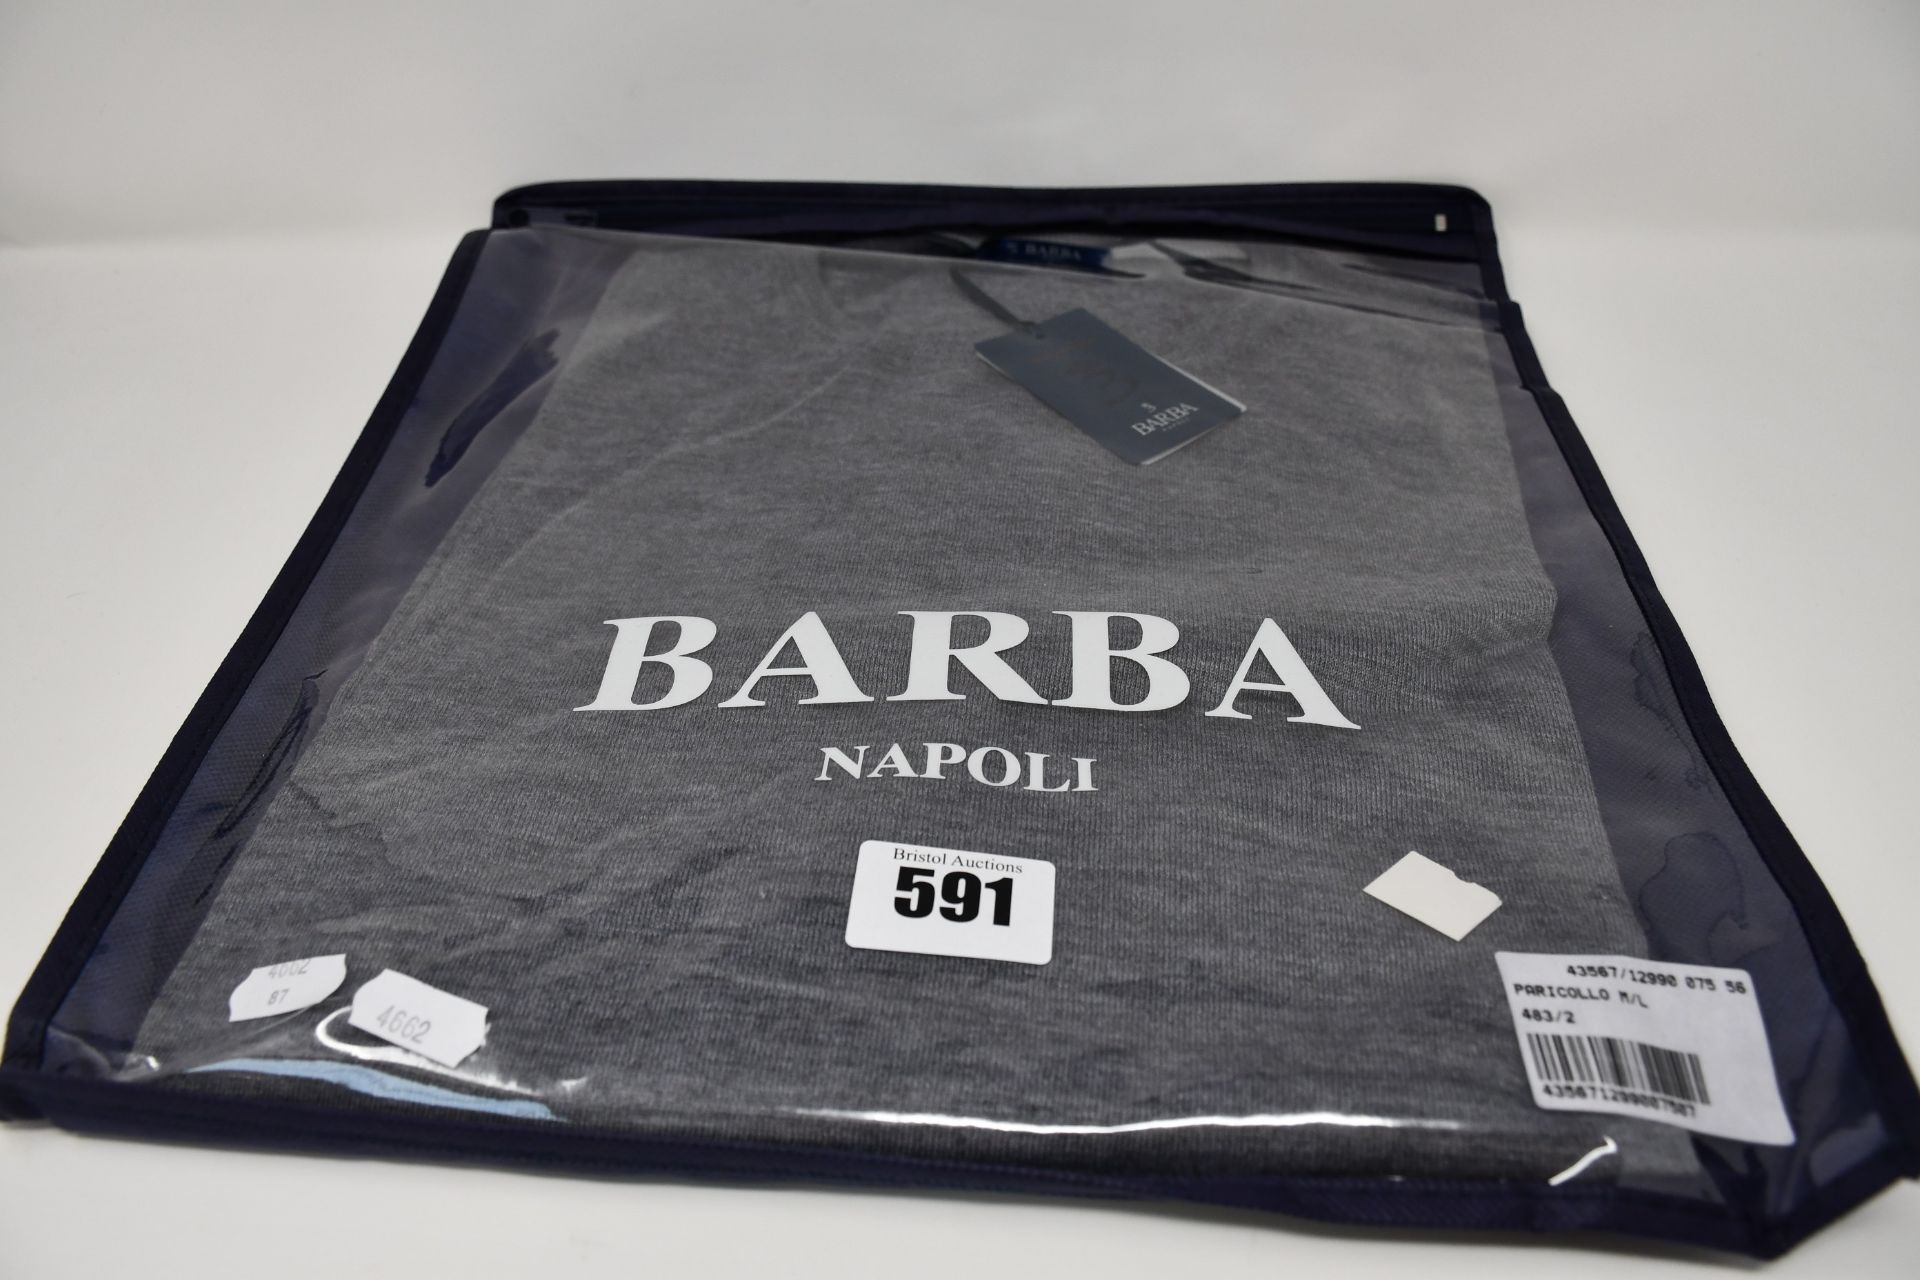 An as new Barba Napoli cashmere pullover (M/L - RRP £160).